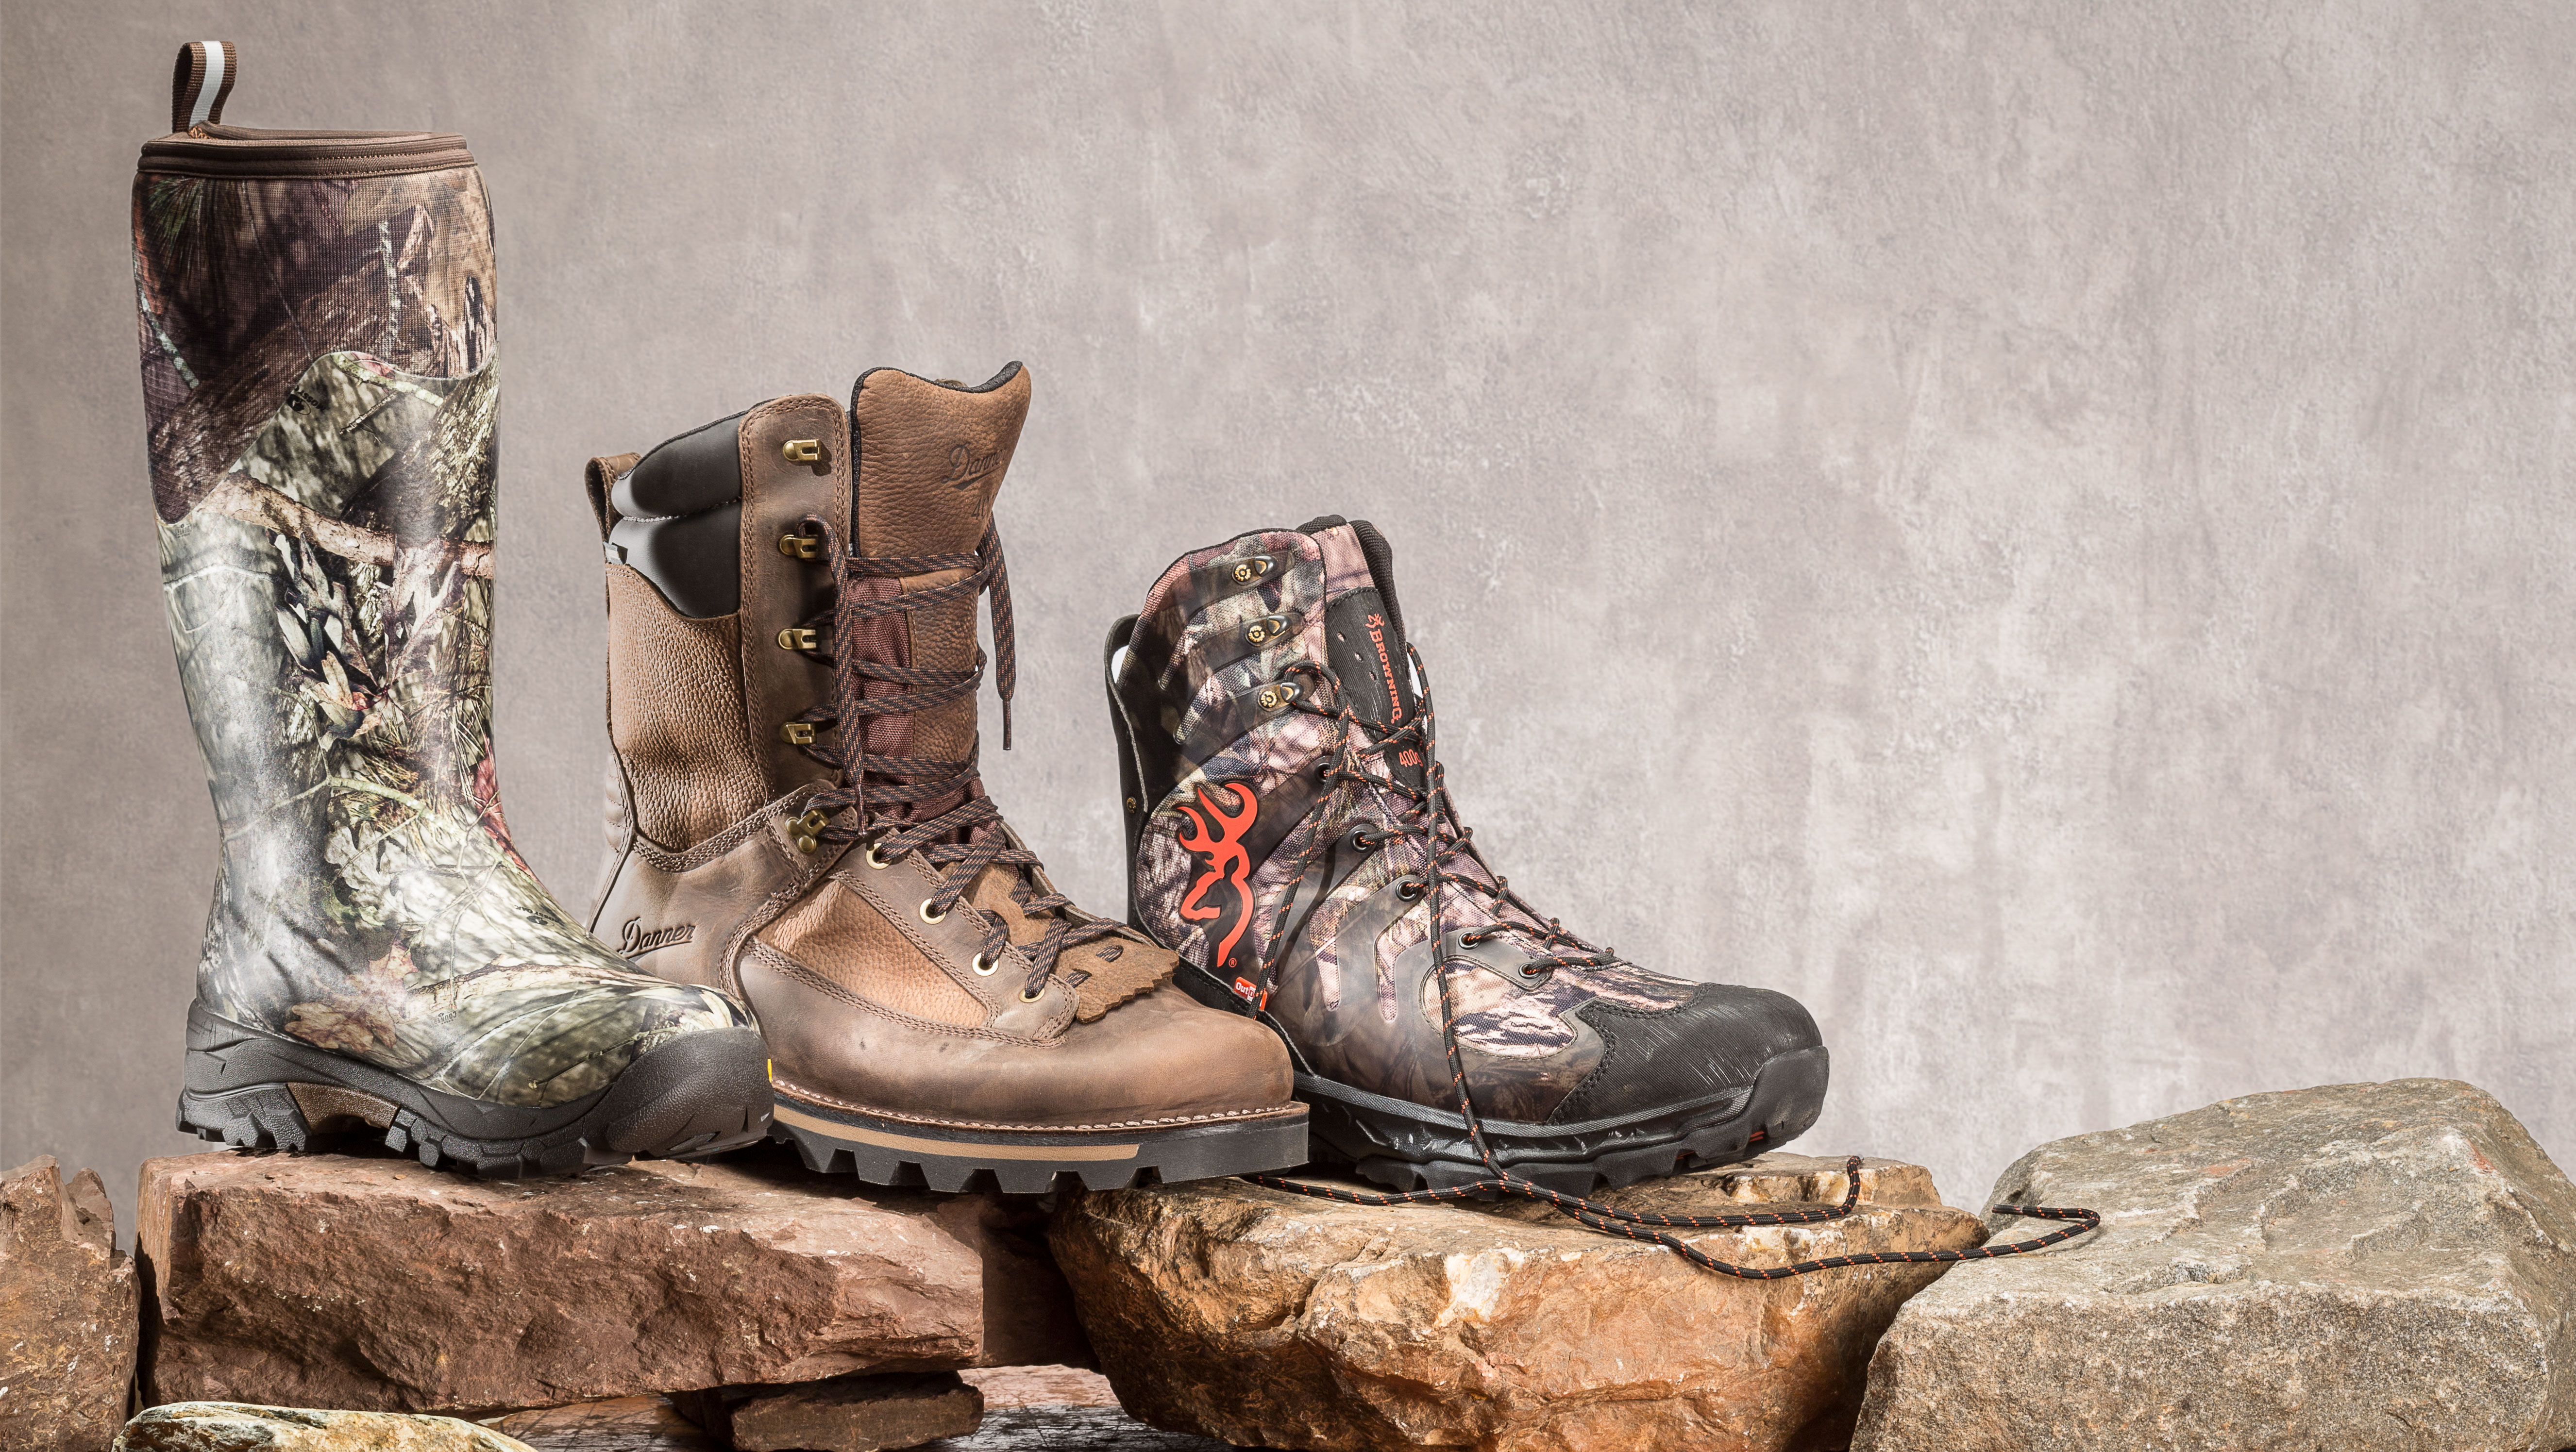 Boots & Socks 101: Critical For Hunting, Hiking, Backpacking Success